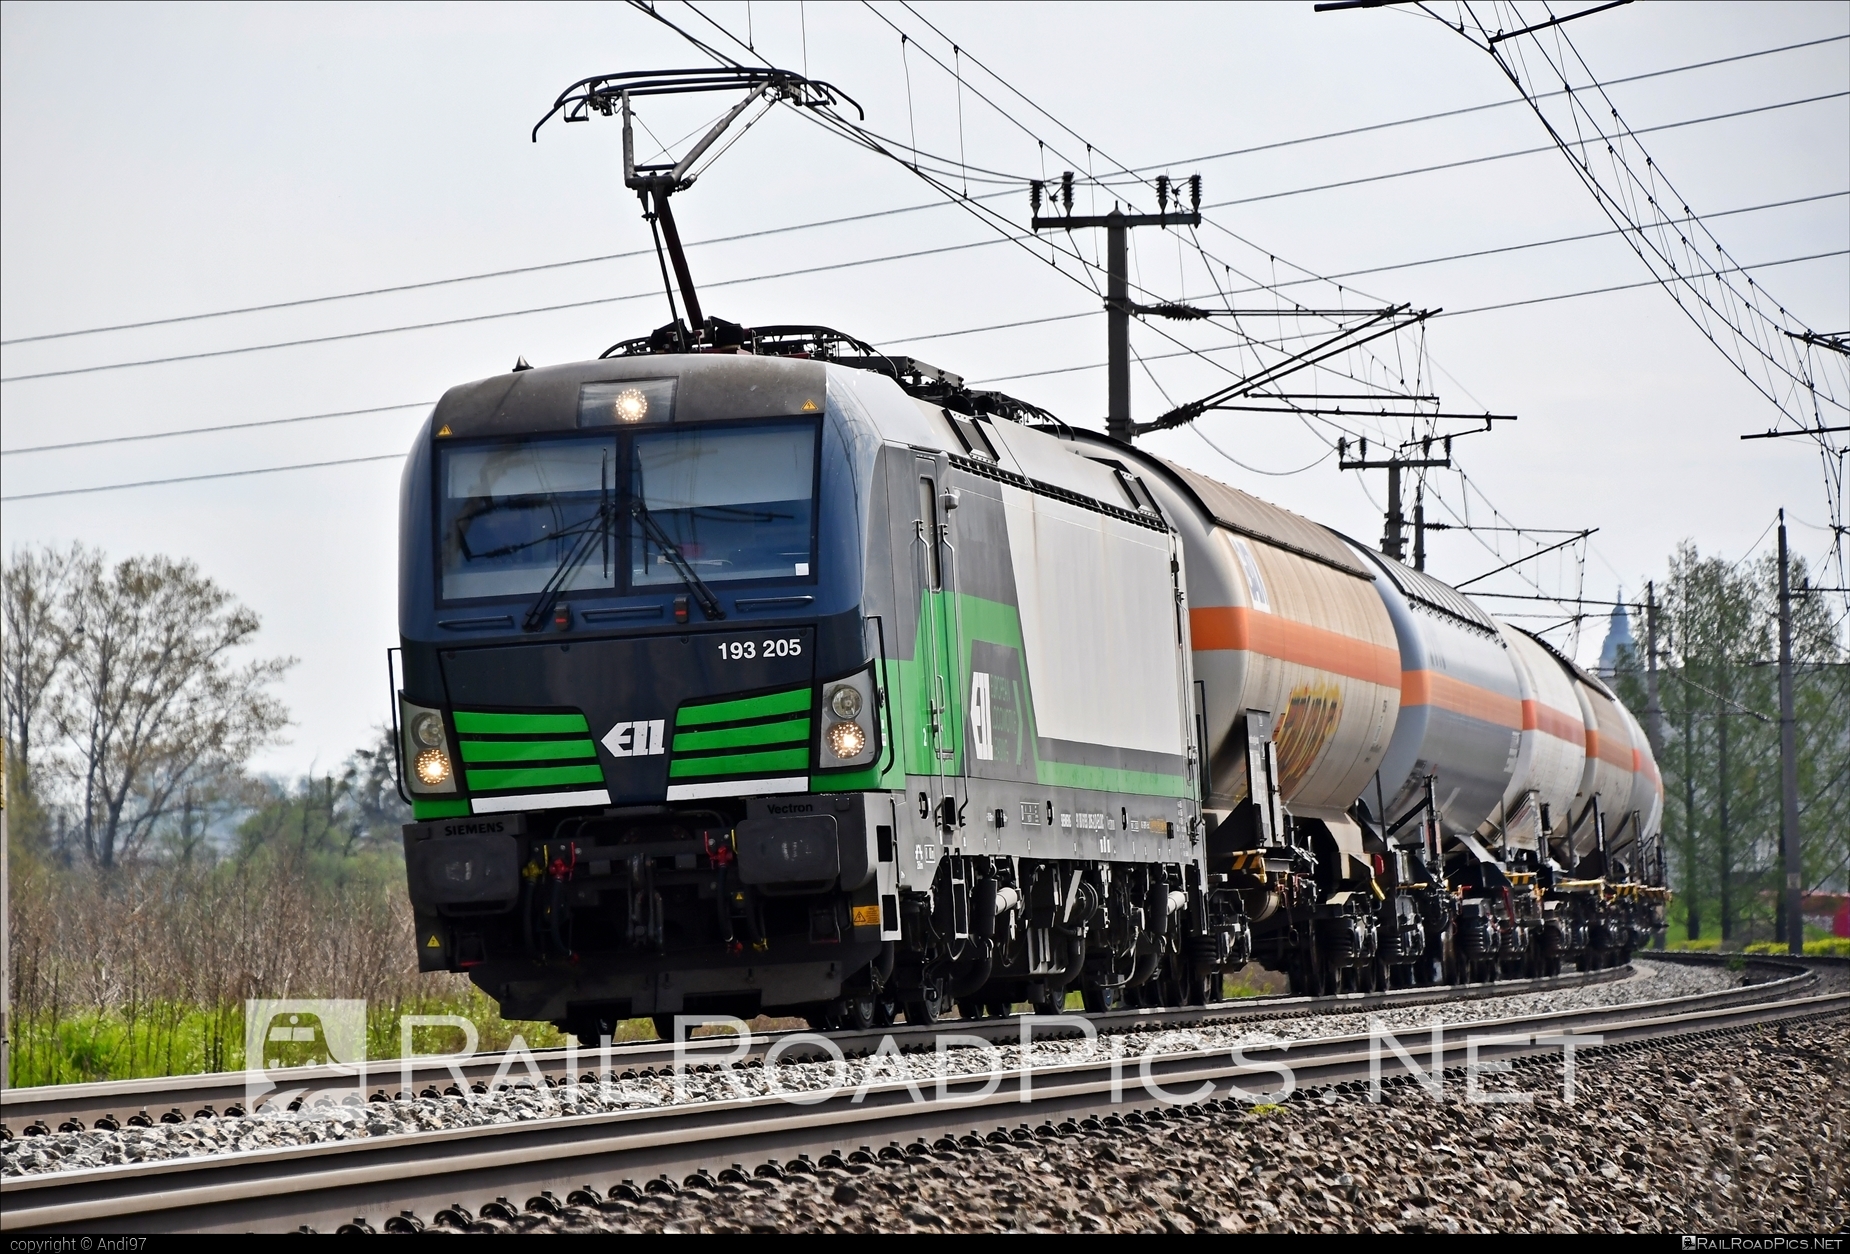 Siemens Vectron MS - 193 205 operated by Retrack GmbH & Co. KG #ell #ellgermany #eloc #europeanlocomotiveleasing #kesselwagen #retrack #retrackgmbh #siemens #siemensVectron #siemensVectronMS #tankwagon #vectron #vectronMS